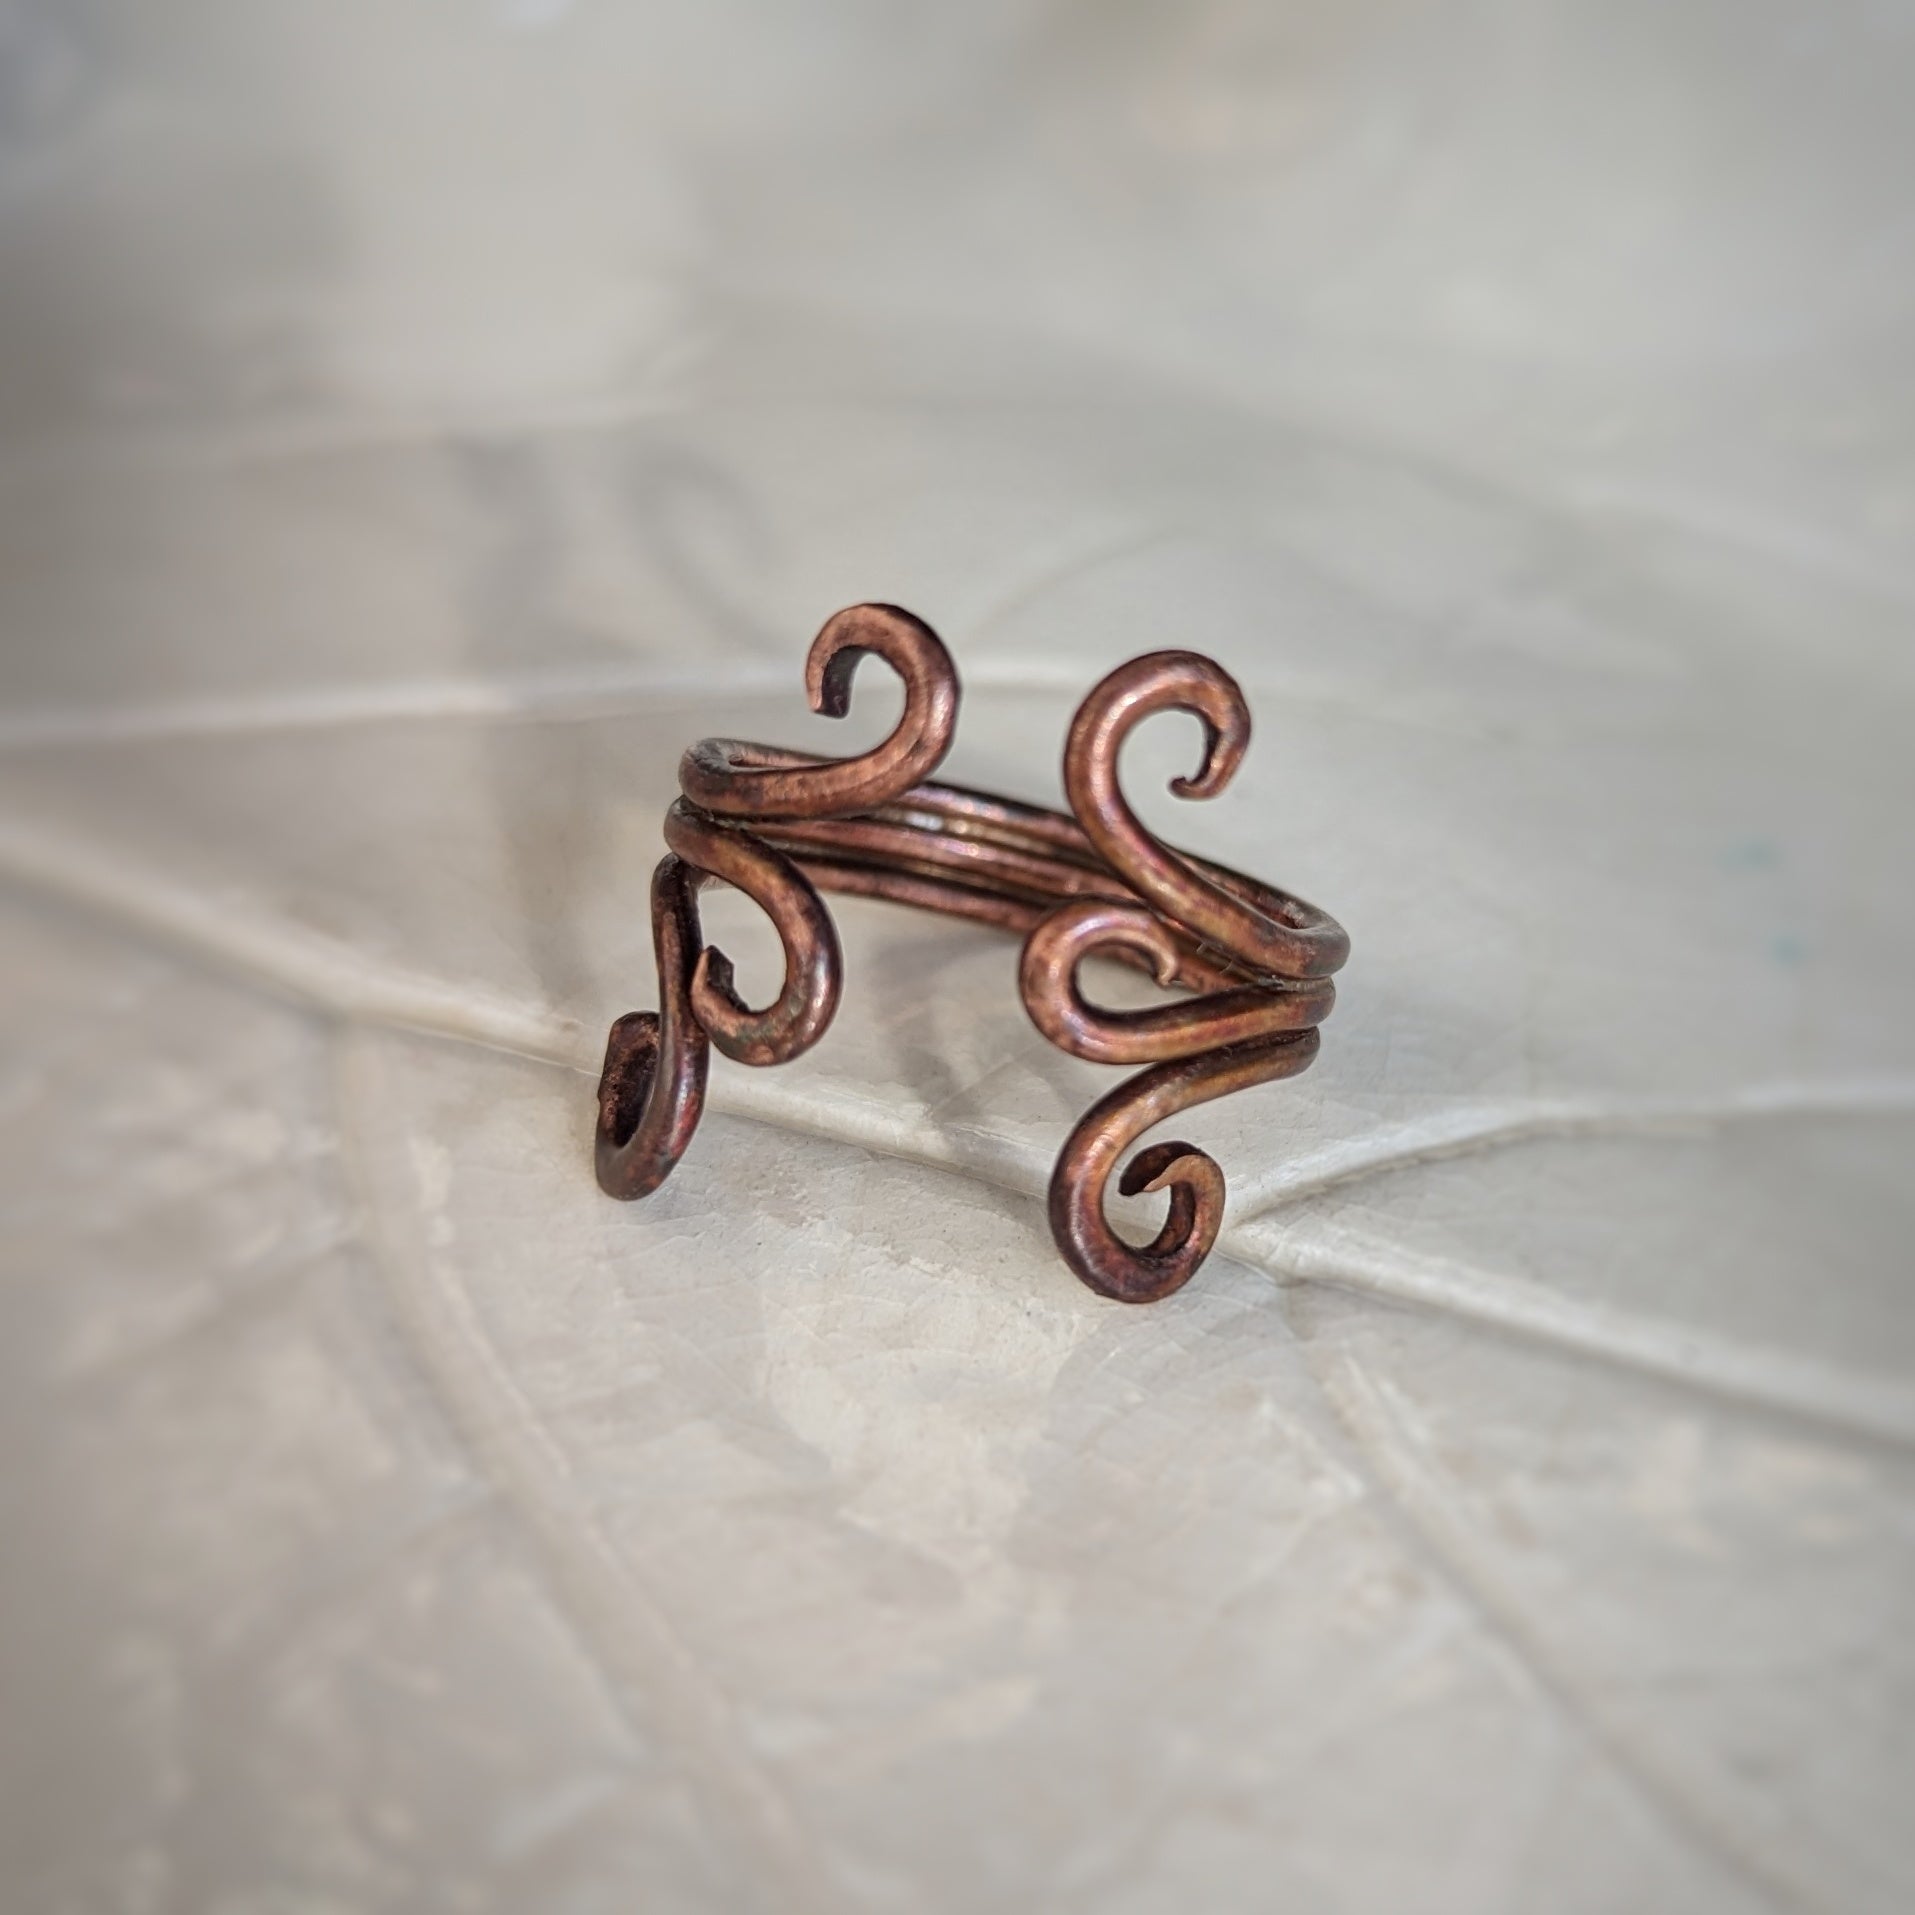 An adjustable copper ring consisting of three wires soldered together, each side ending in graceful swirls has a rainbow appearing patina.